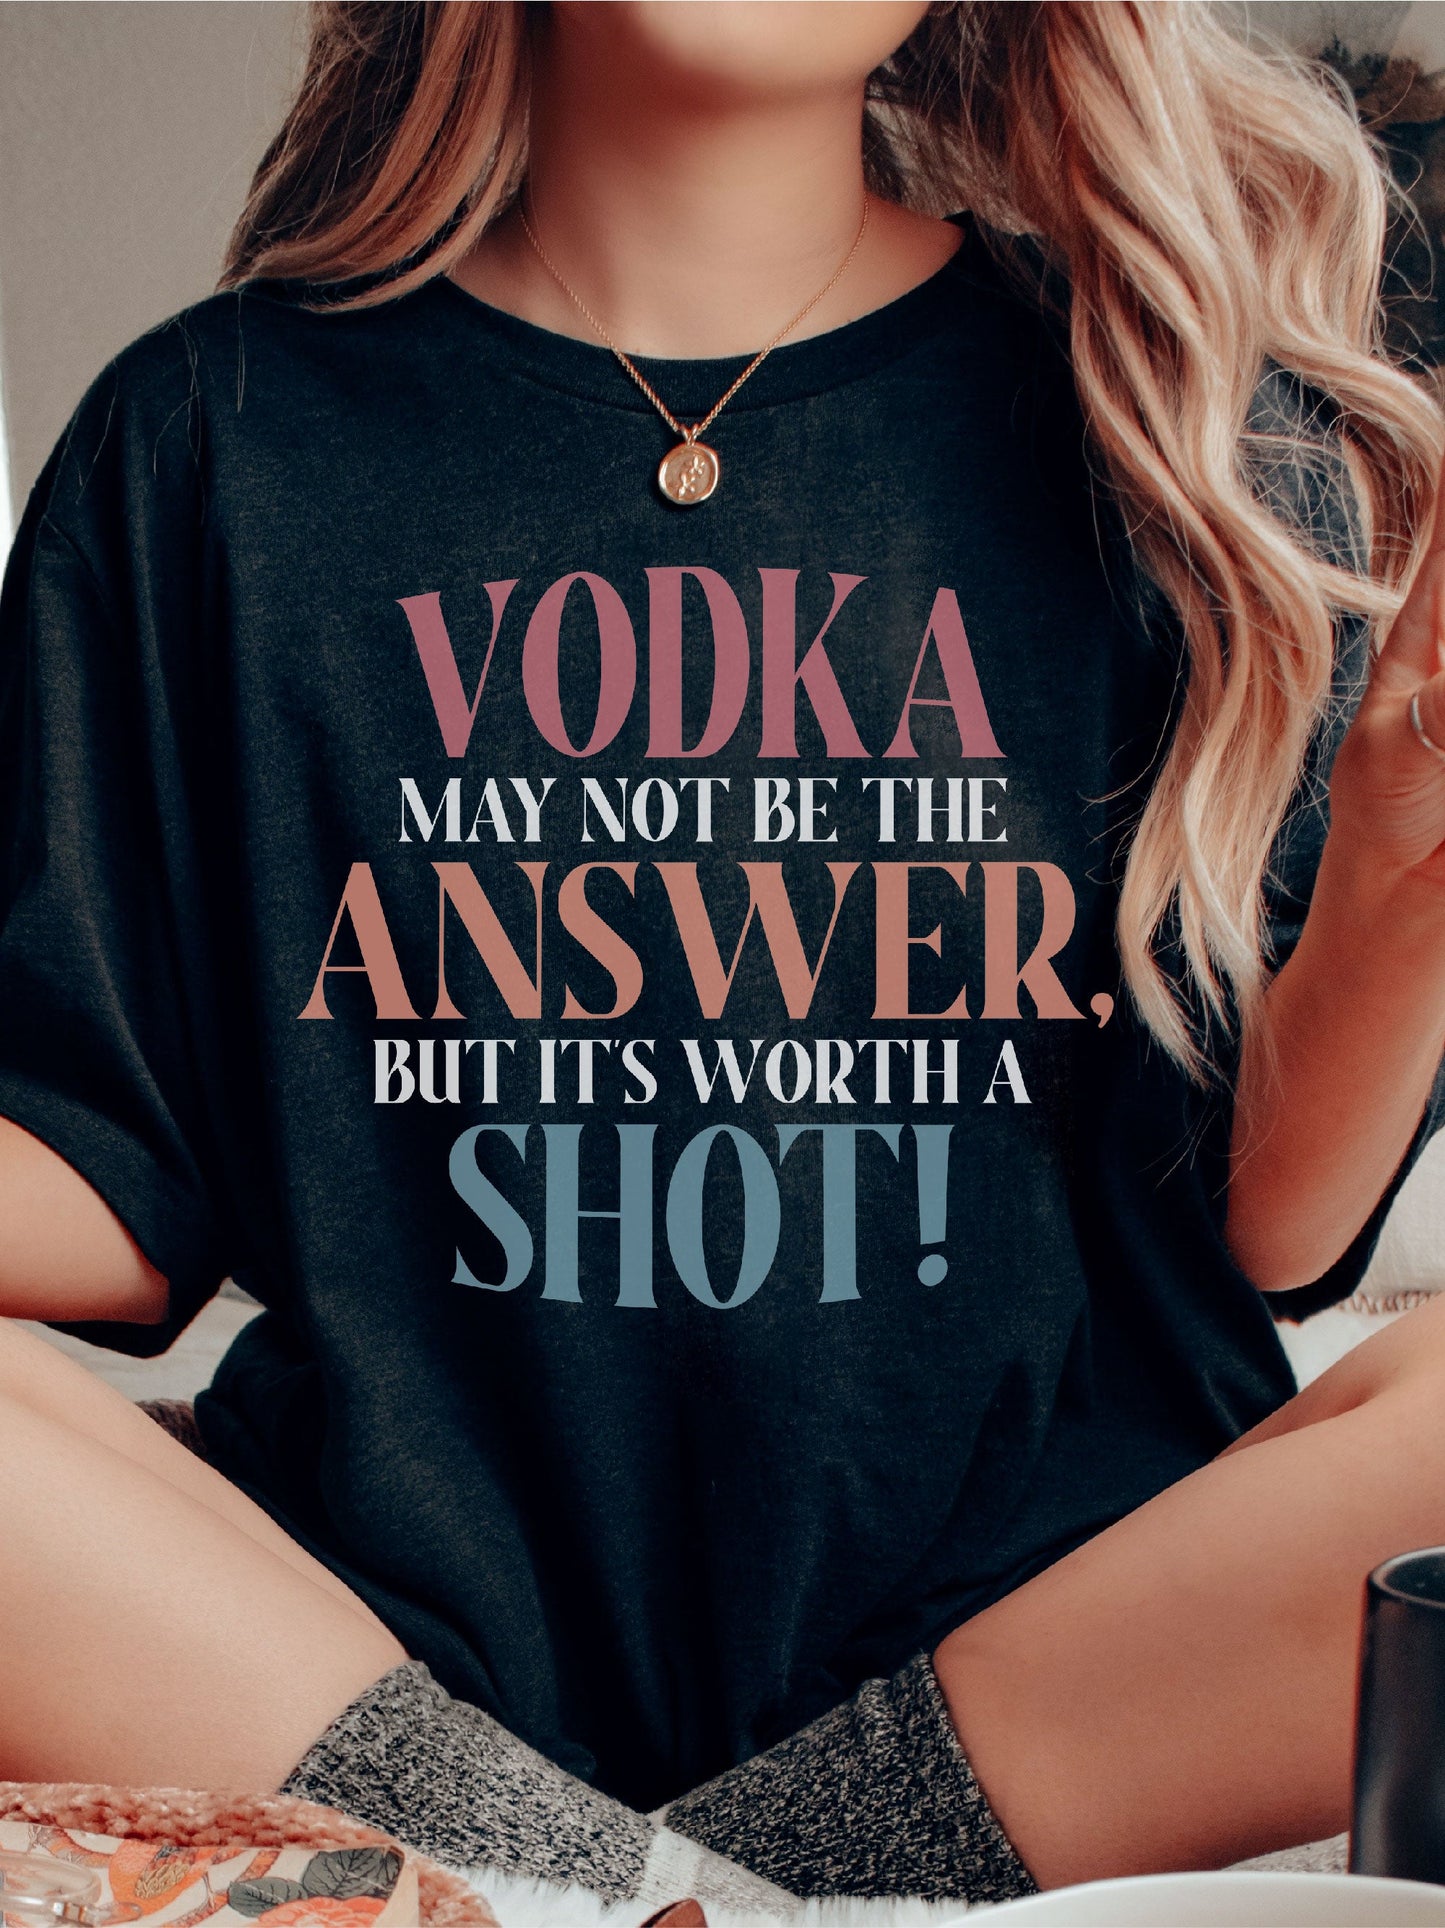 Vodka May Not Be The Answer, But It's Worth A Shot!